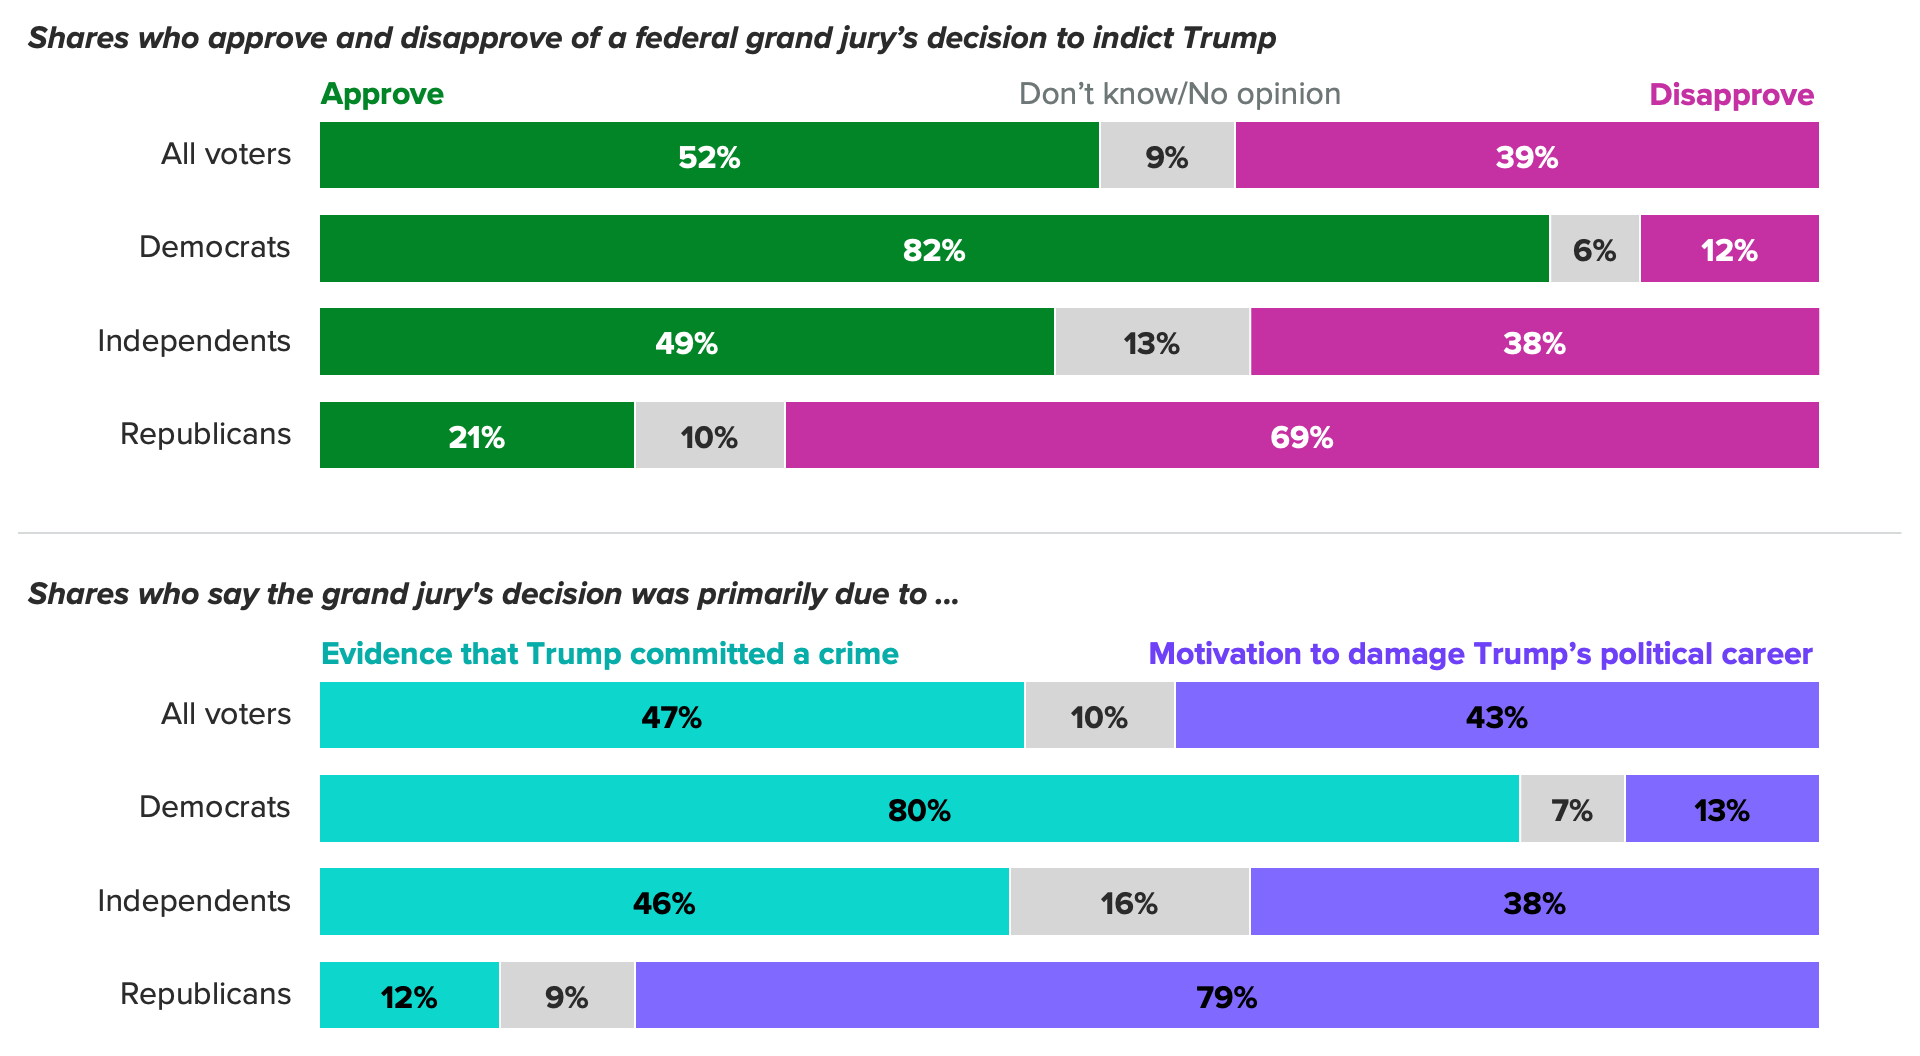 Bar chart of voters' views on a federal grand jury's decision to indict former President Donald Trump over his handling classified documents after leaving the White House, showing voters are 13 percentage points more likely to approve than disapprove of a federal grand jury bringing charges related to Trump’s handling of classified document.